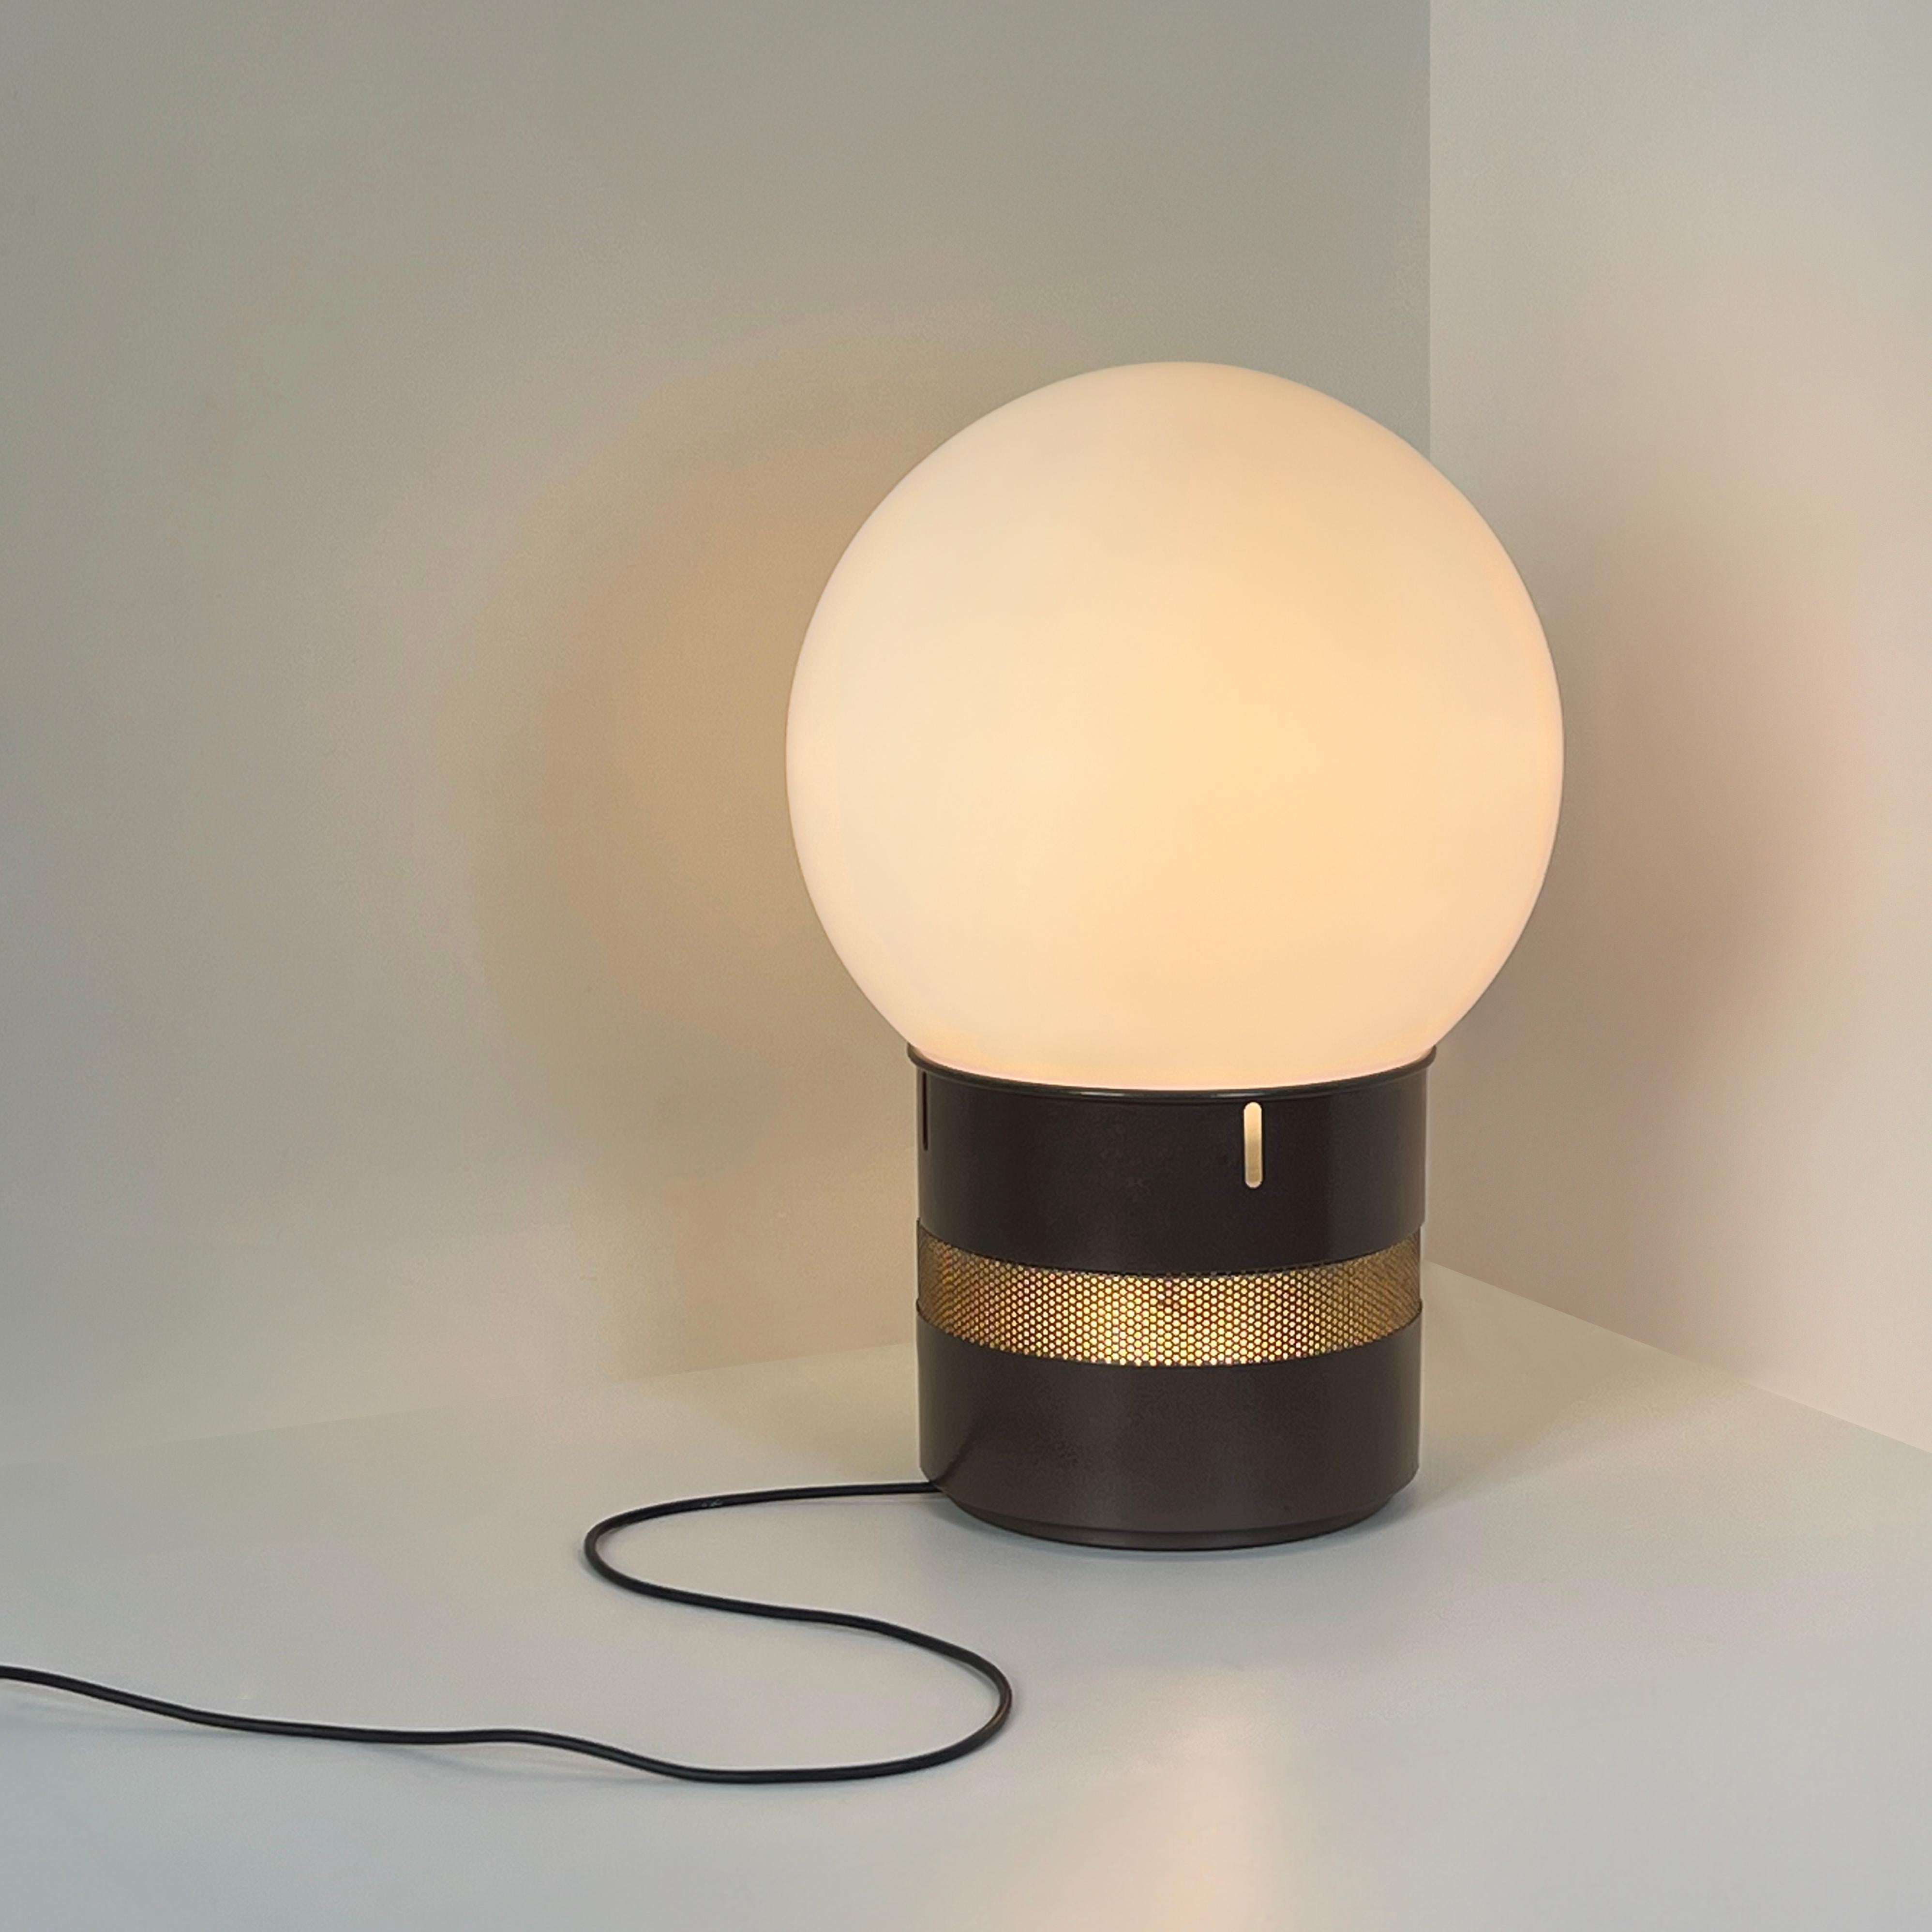 The Mezzo Oracolo lamp, a masterpiece of design by Gae Aulenti for Artemide in the 1970s, is a stunning embodiment of clean lines and timeless elegance.

At its core, this lamp is defined by a captivating glass sphere, reminiscent of an oracle's